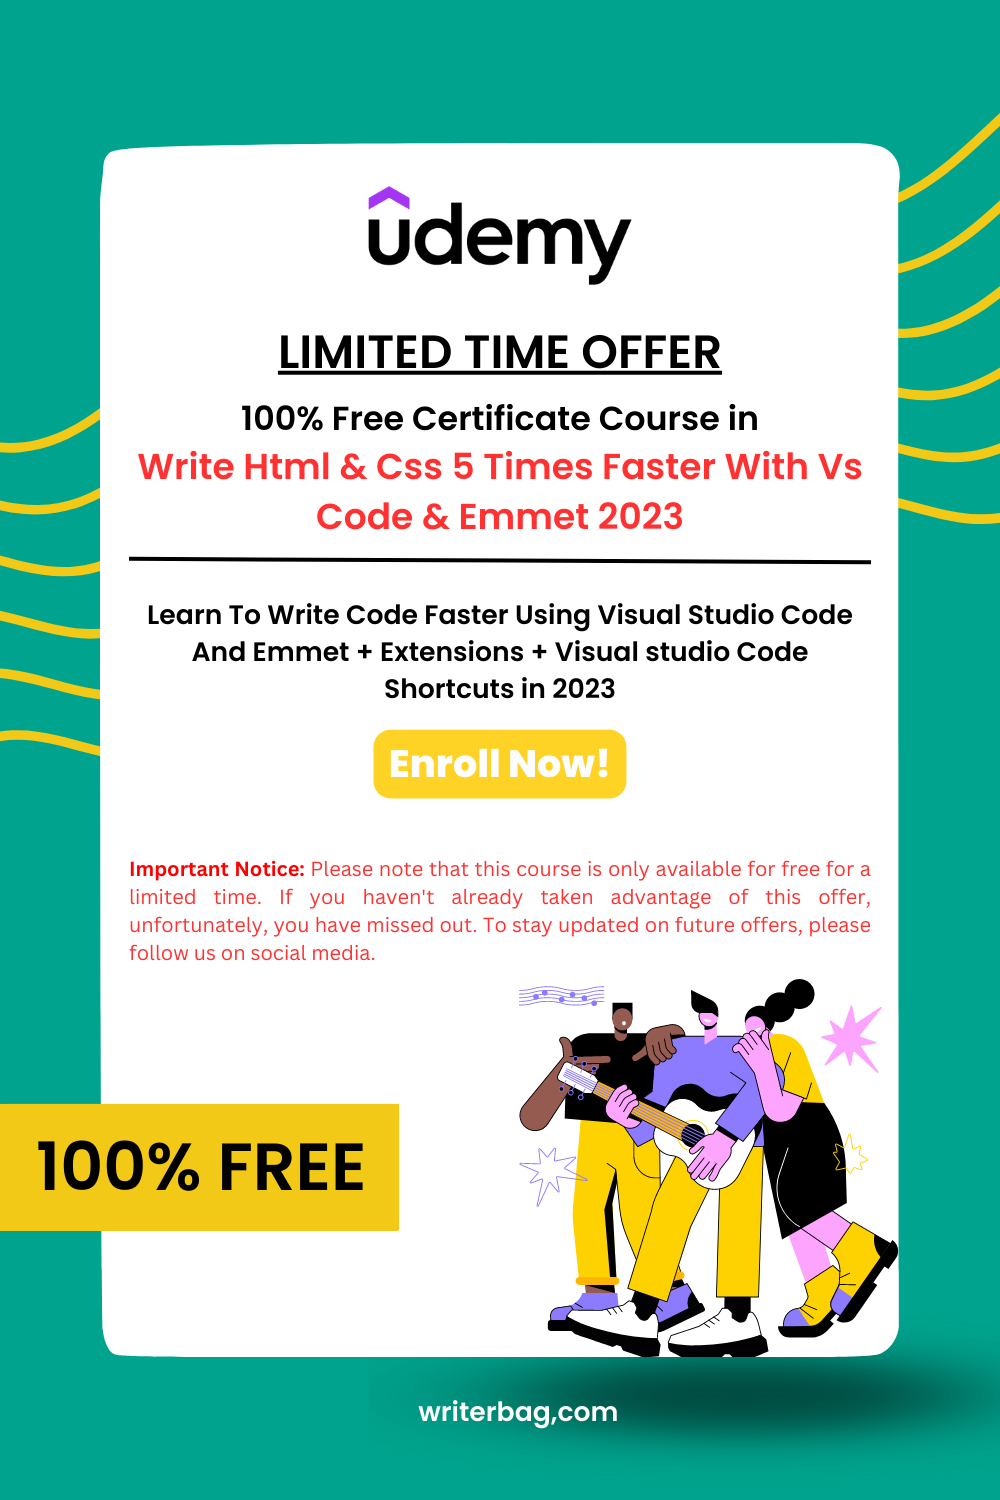 Online Course Write Html And Css 5 Times Faster With Vs Code And Emmet 2023